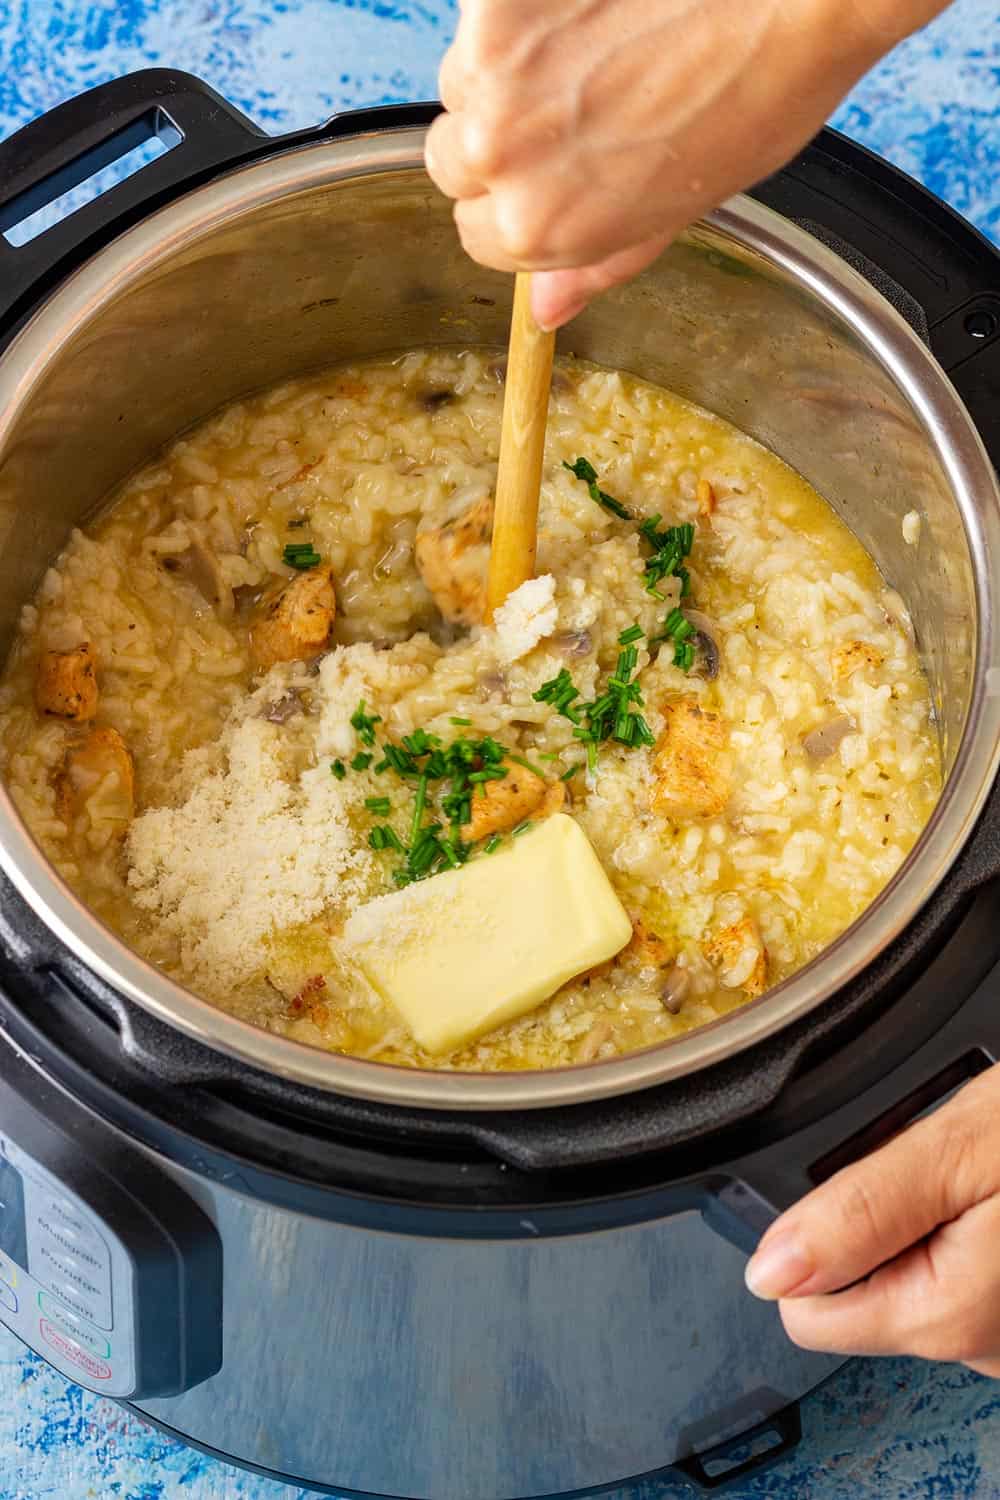 Pressure cooker with chicken risotto